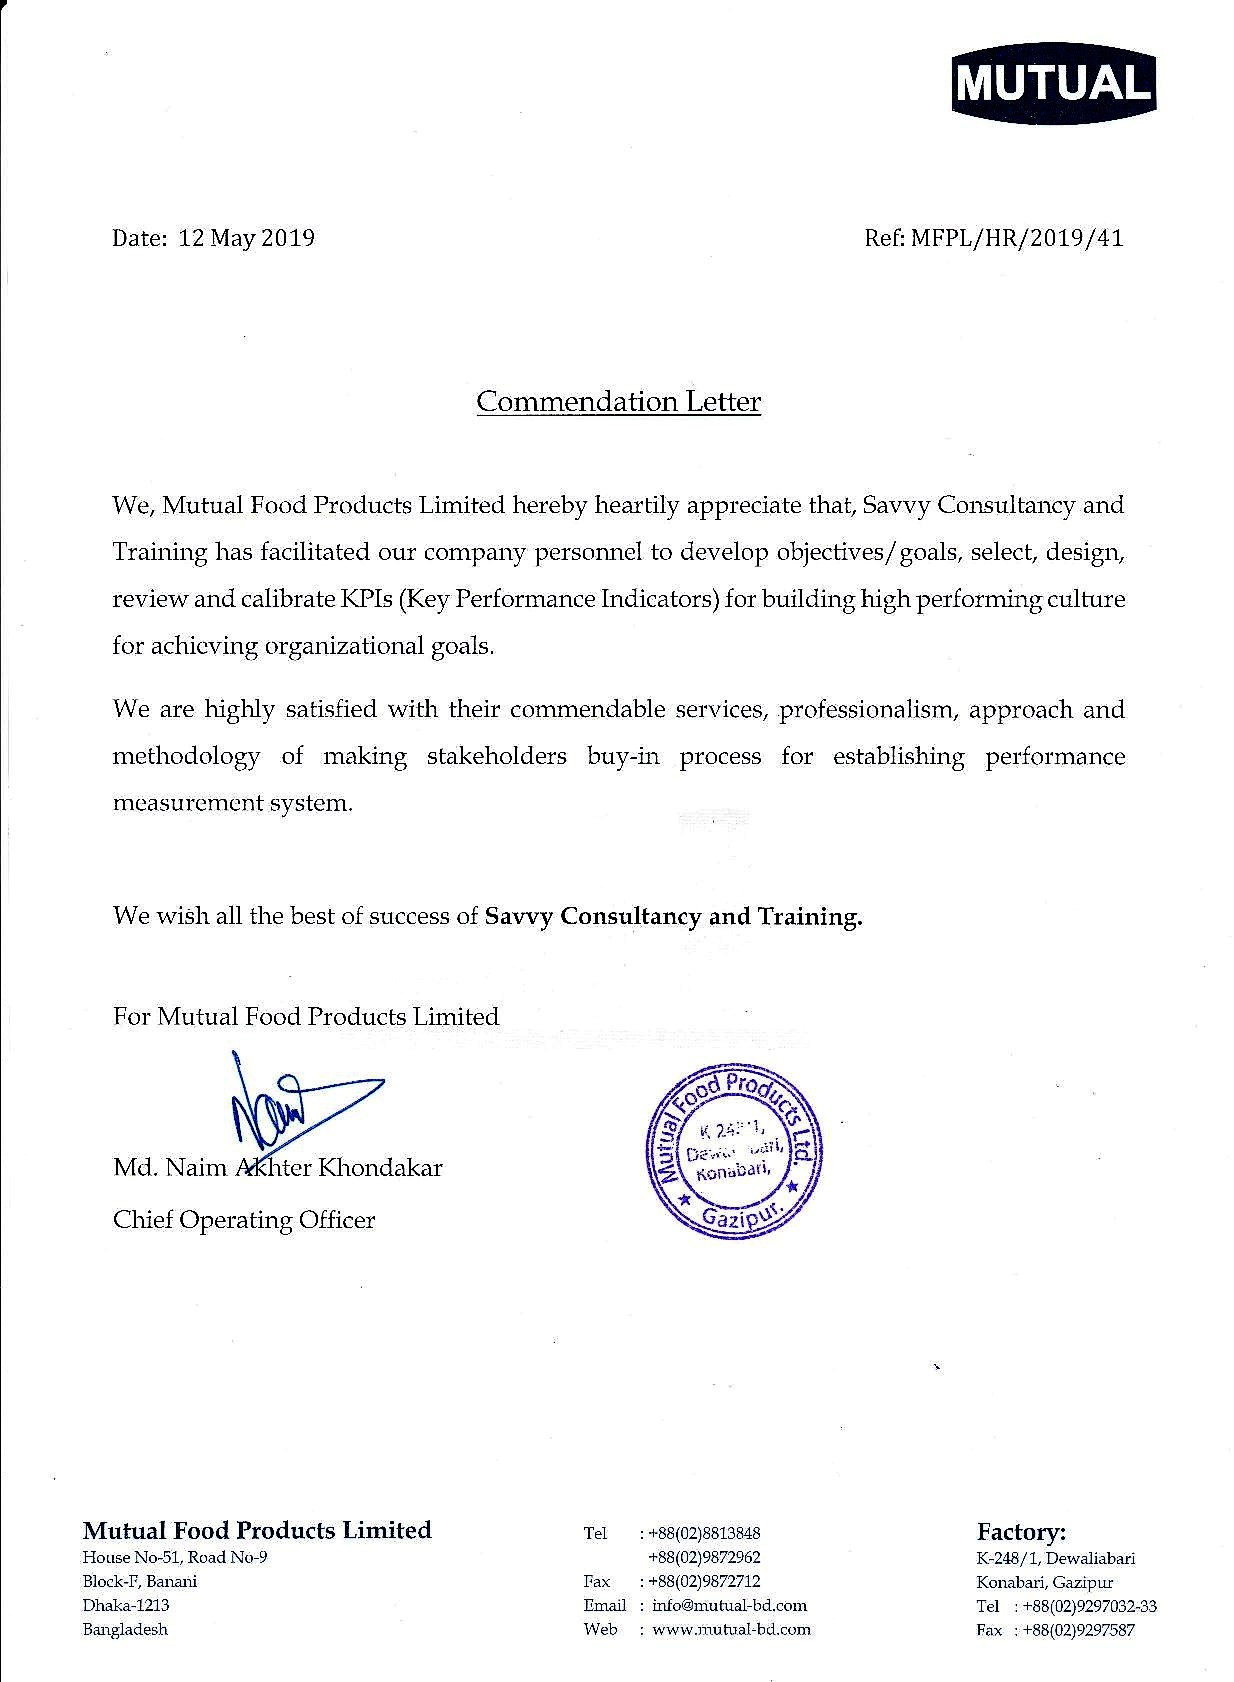 Commendation letter-Mutual Foods